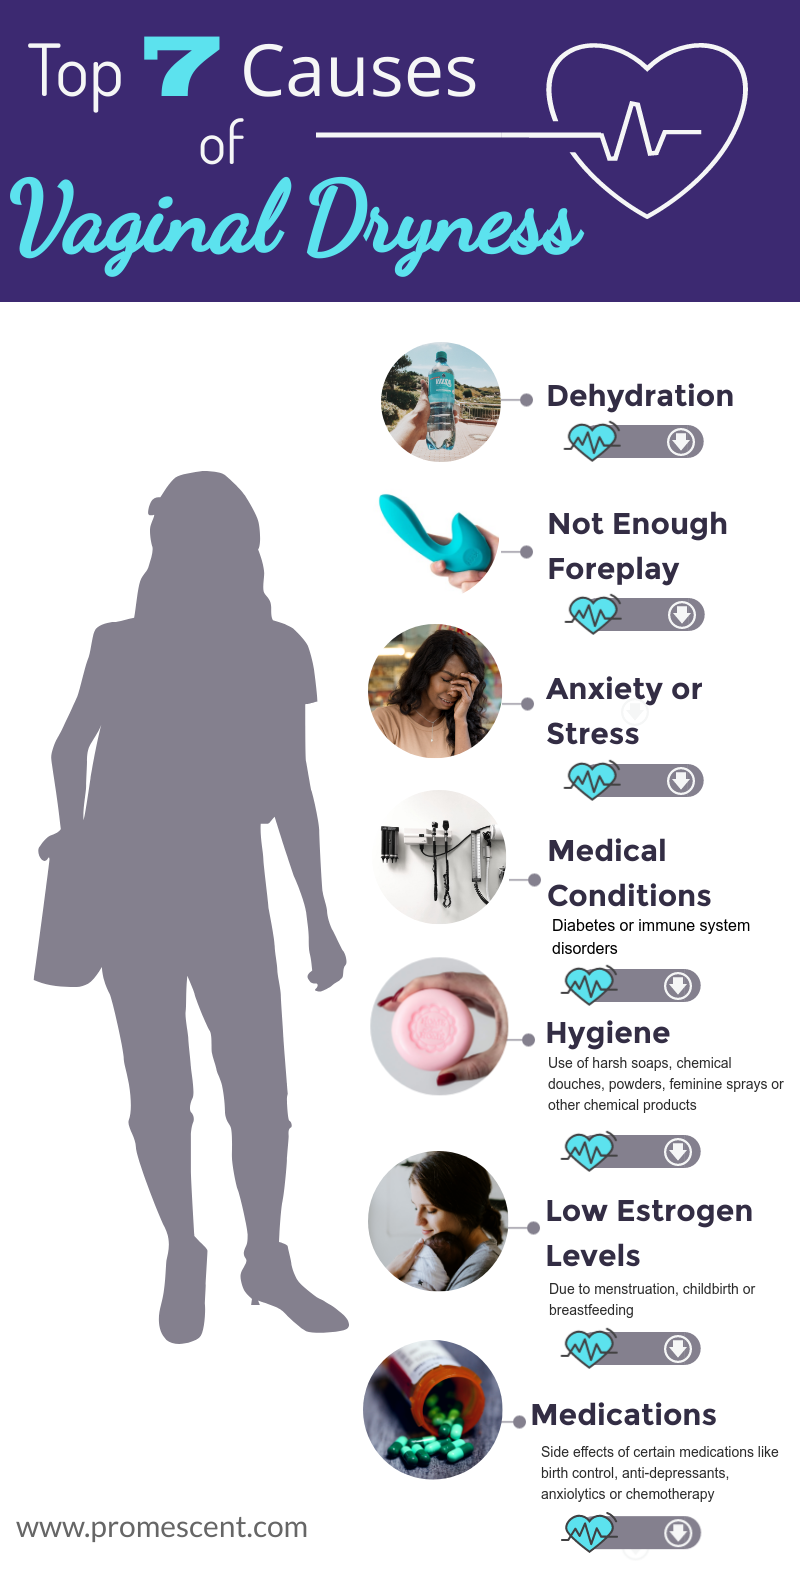 Top 7 Causes of Vaginal Dryness